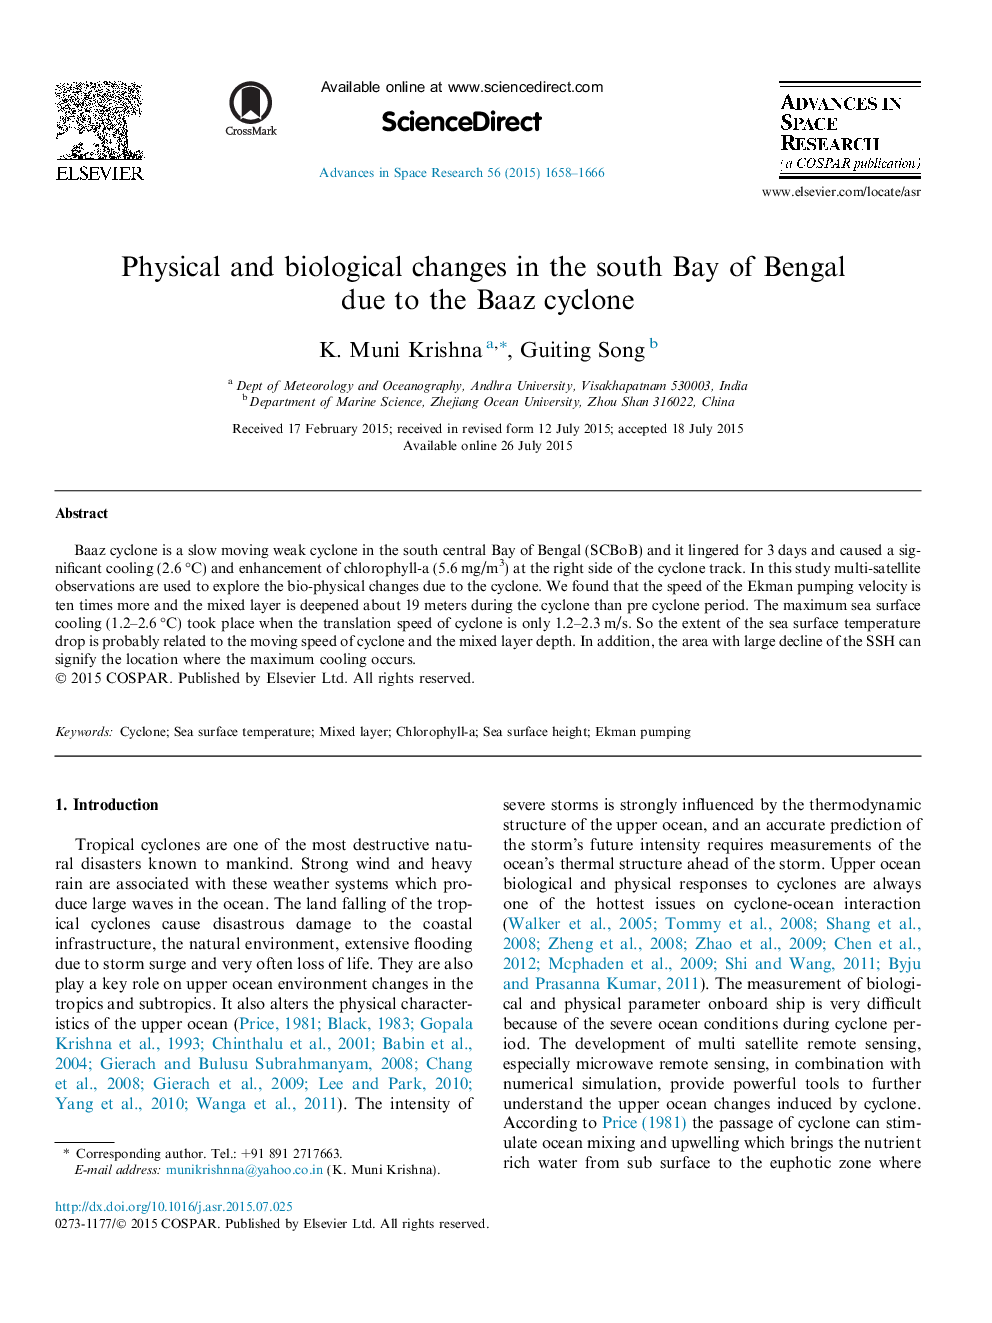 Physical and biological changes in the south Bay of Bengal due to the Baaz cyclone